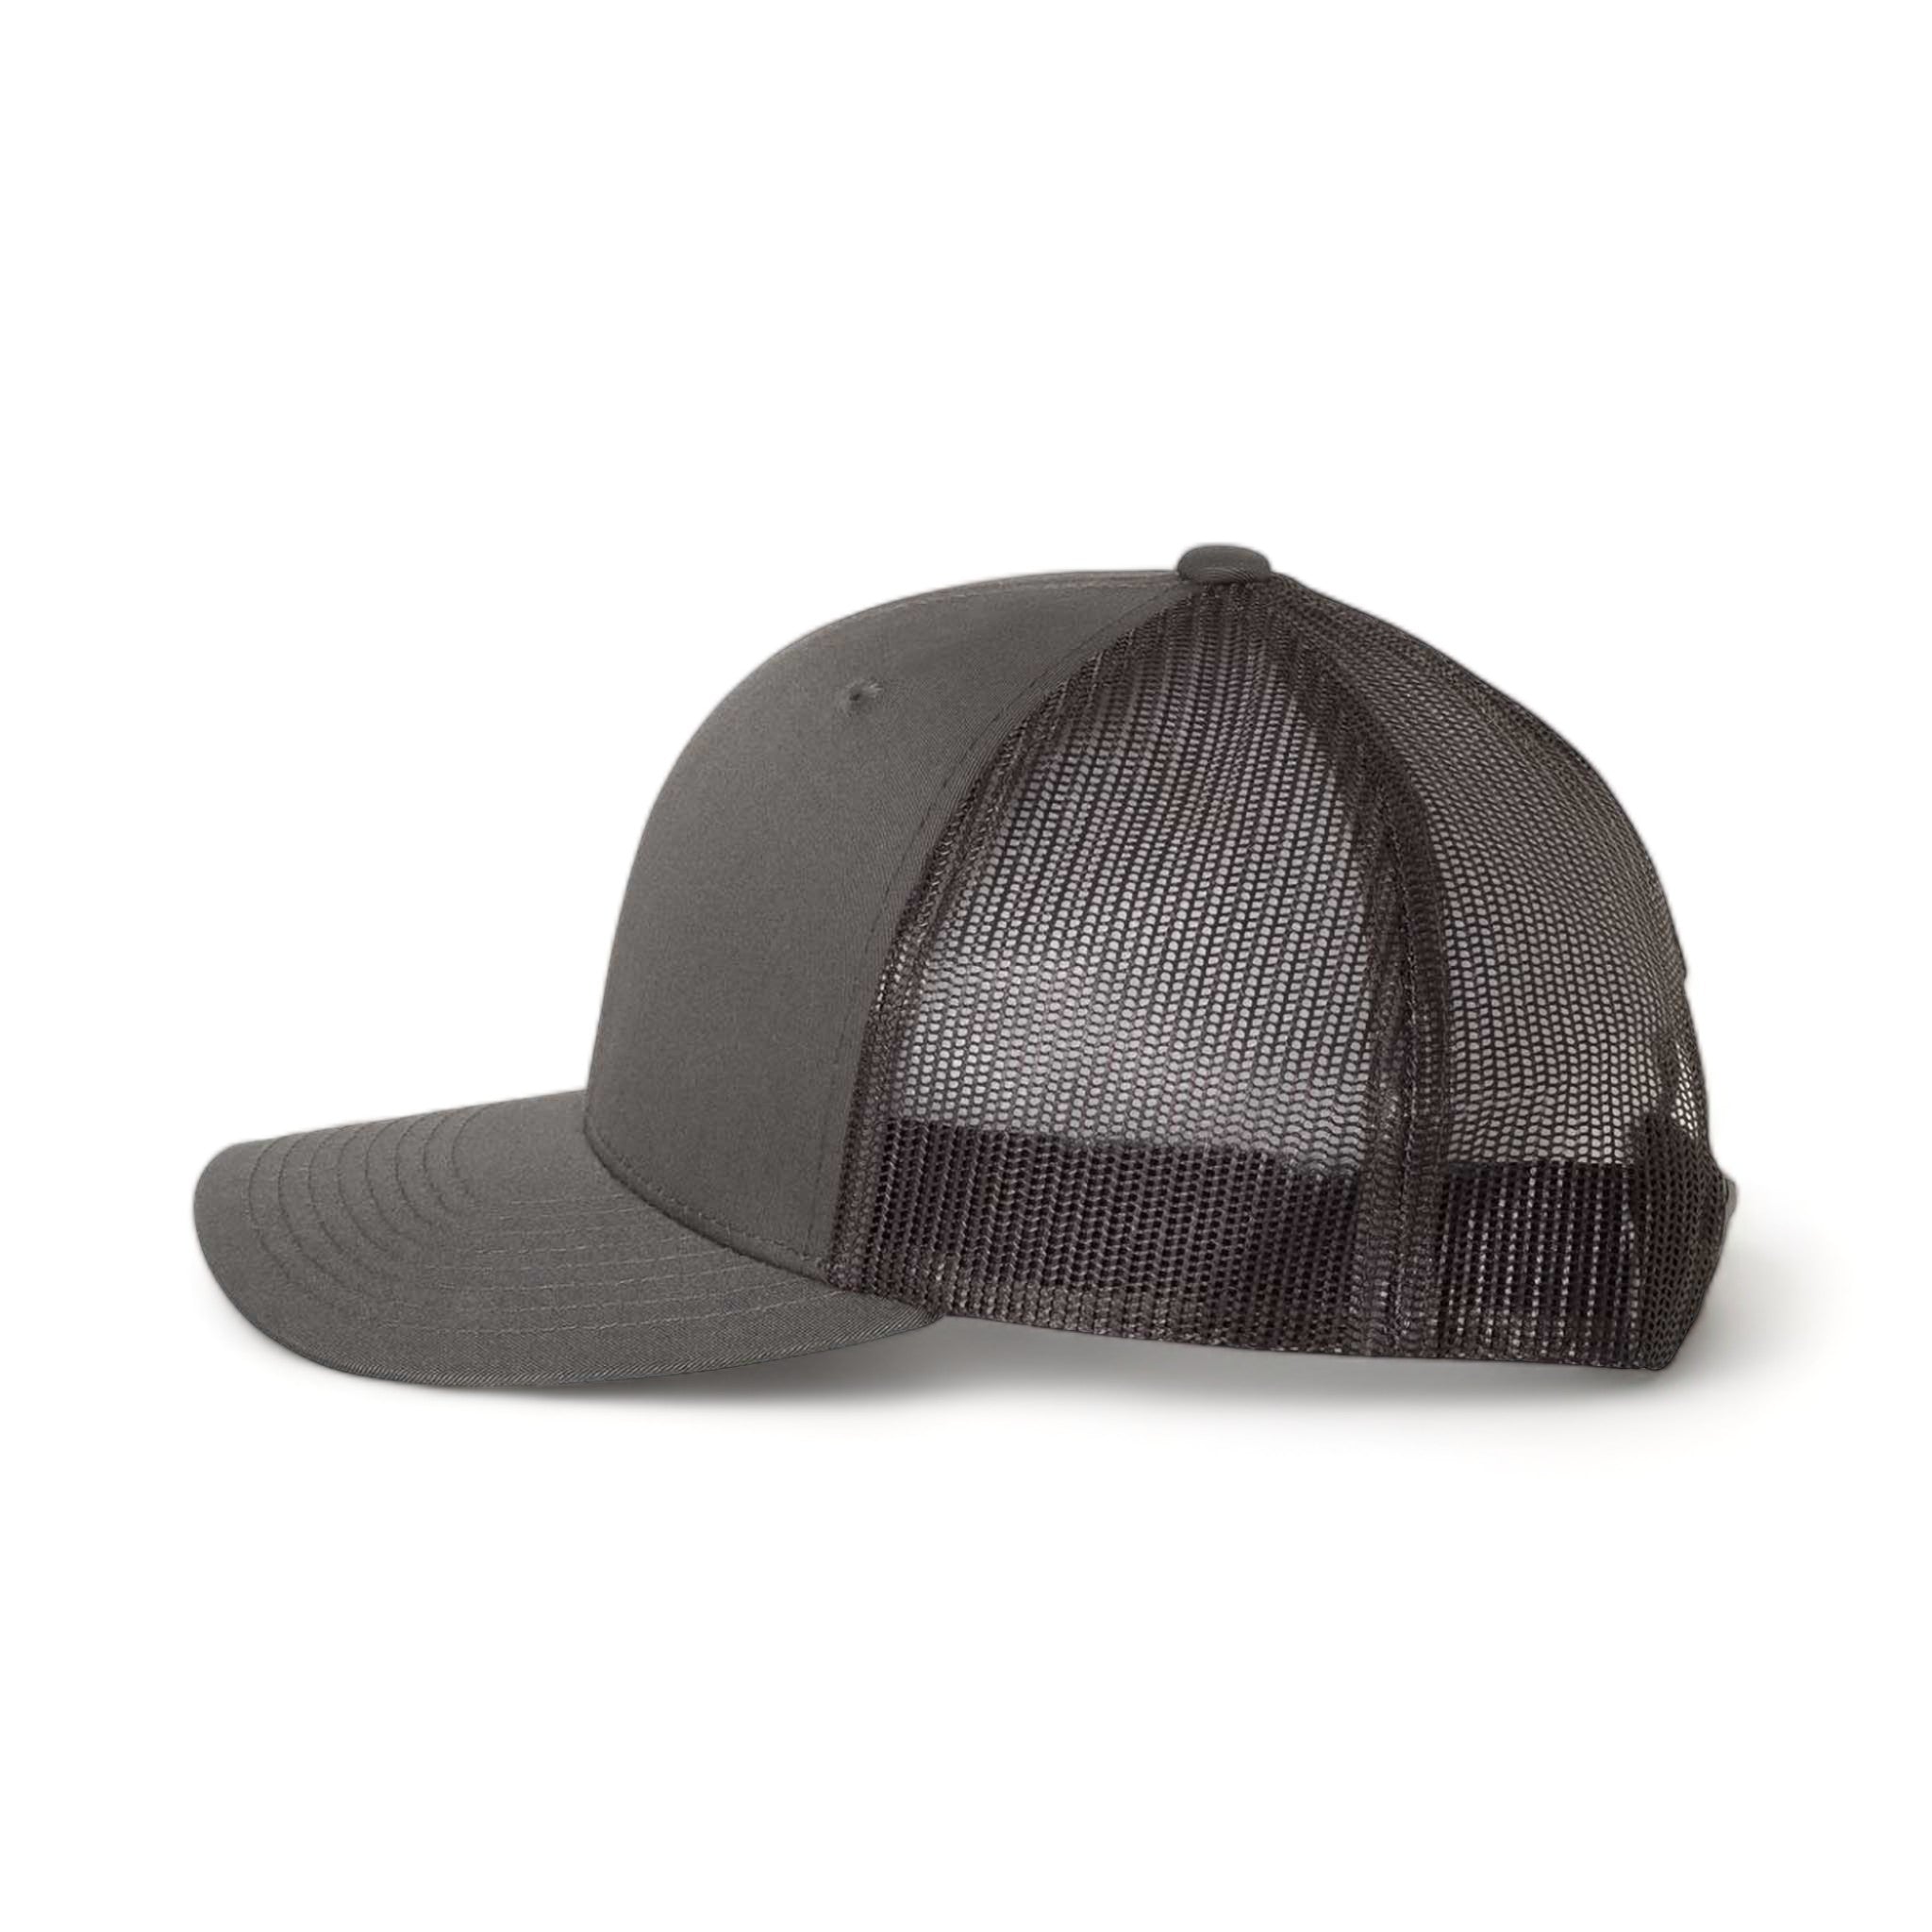 Side view of YP Classics 6606 custom hat in charcoal